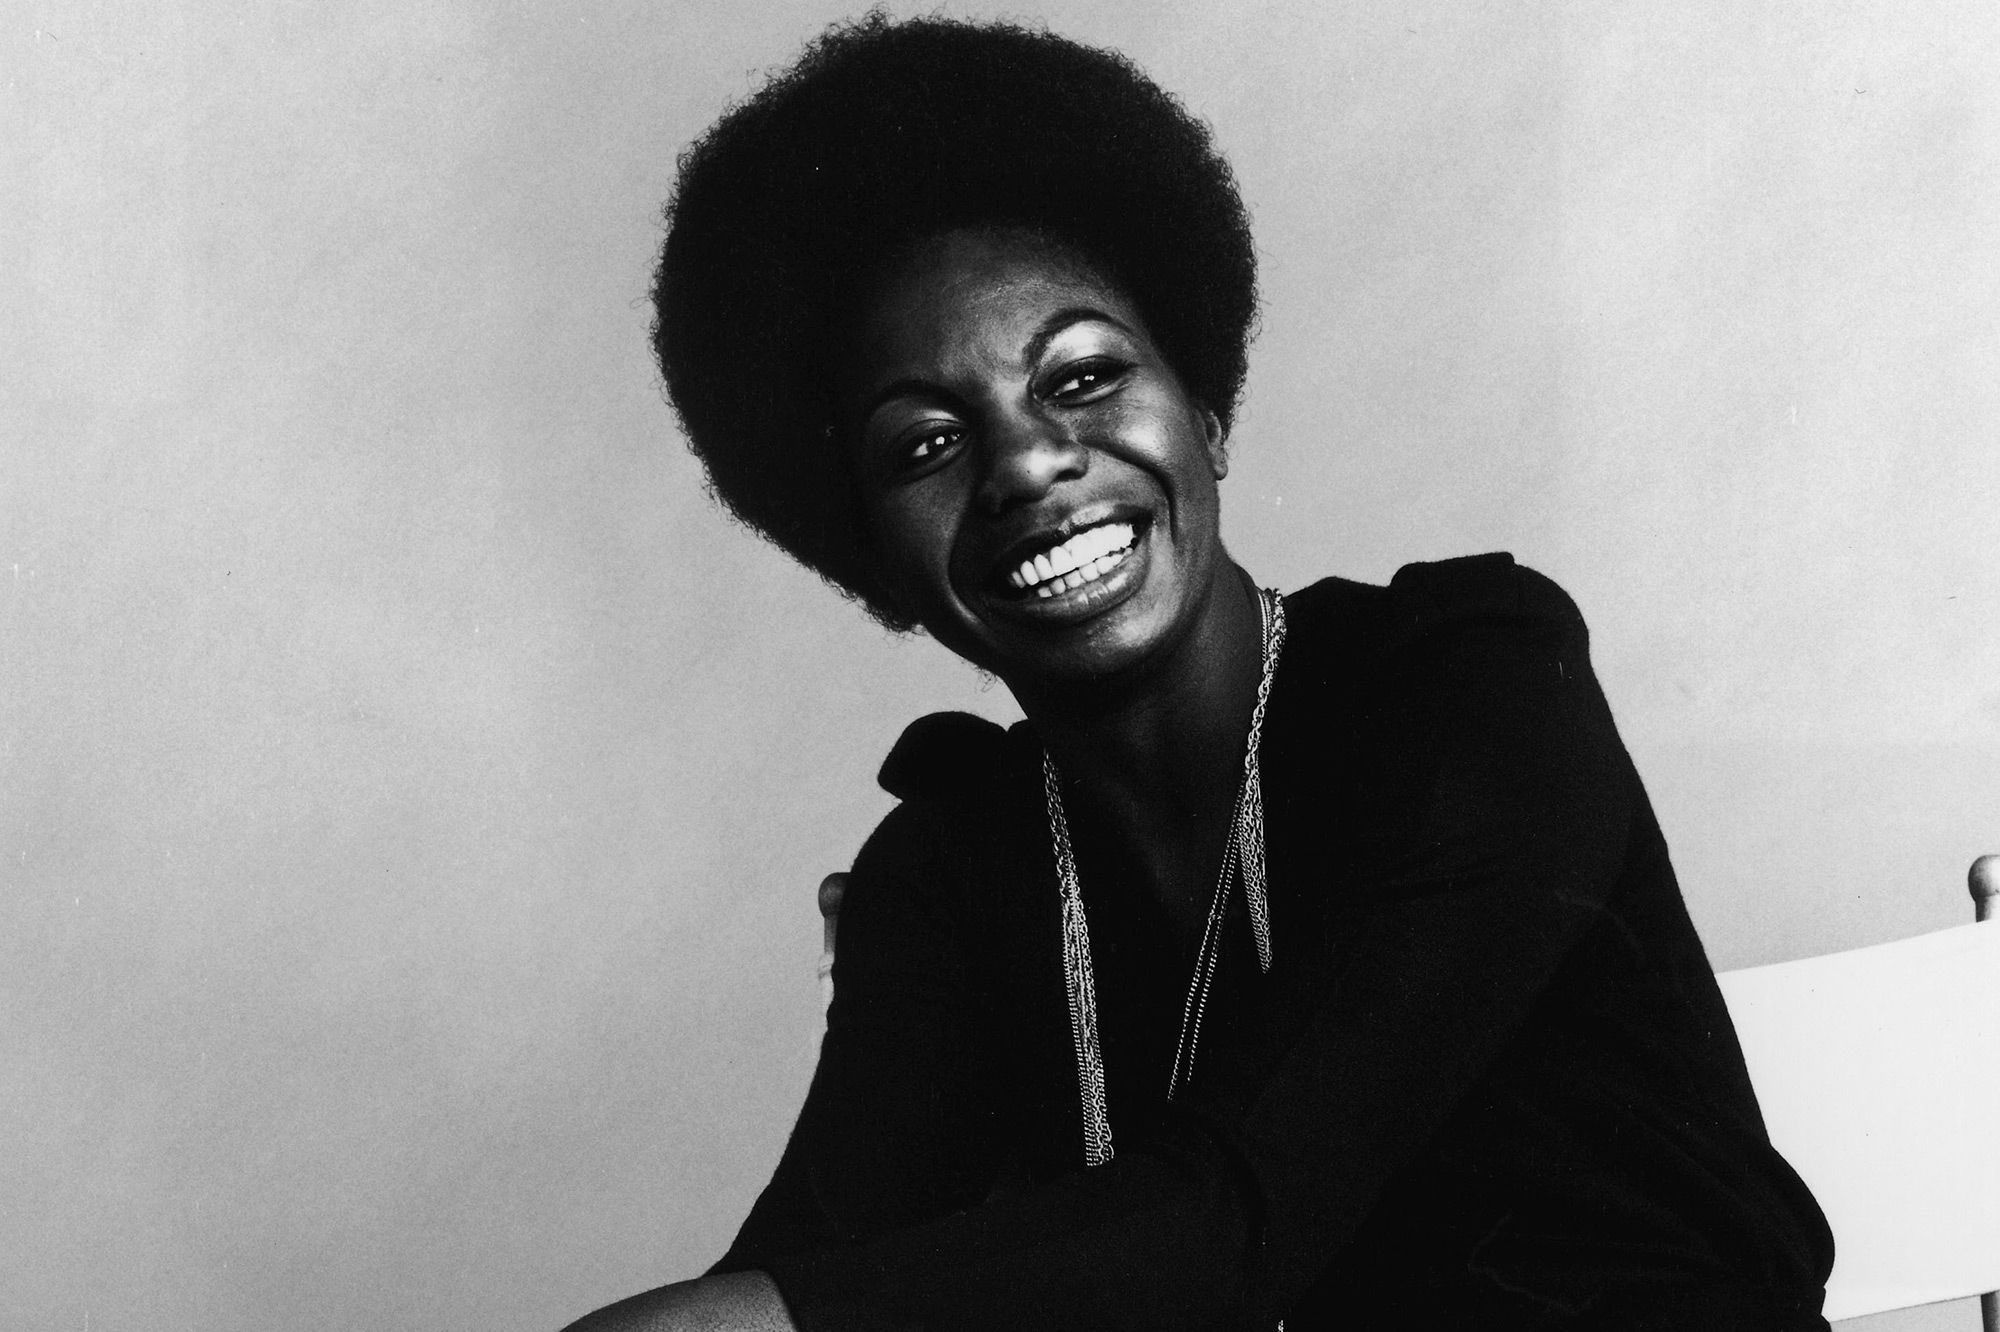 Happy birthday to Nina Simone who would have been 88 today! Those three albums will forever be my favorites. 